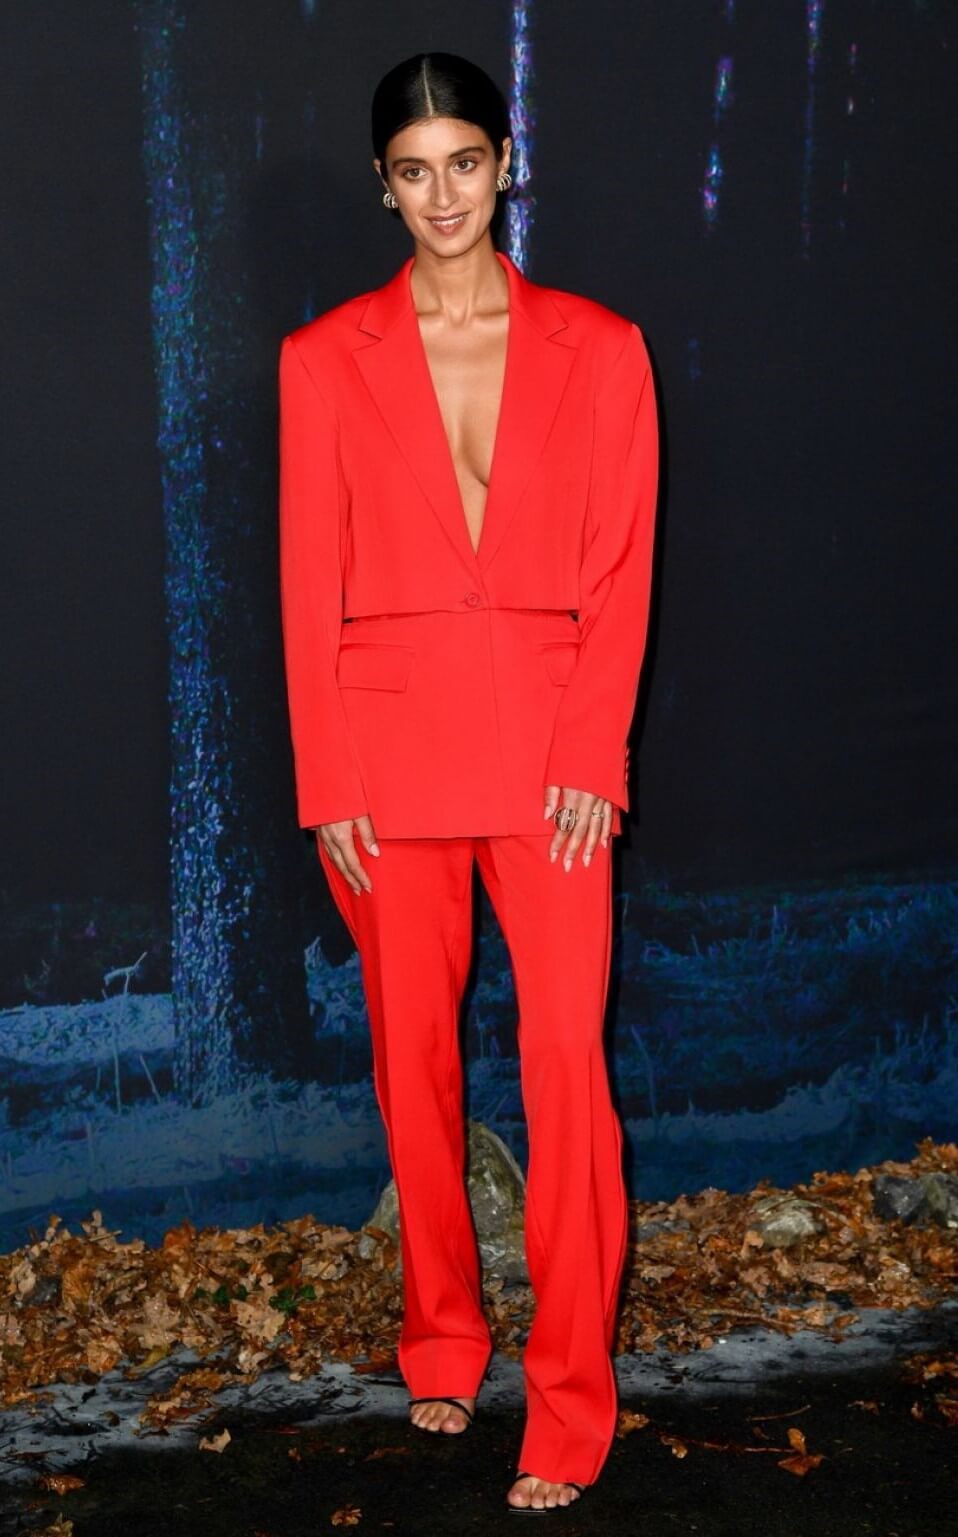 Anya Chalotra In Bright Red Deep Neckline Blazer & Pants At “The Witcher” Season 2 World Premiere in London